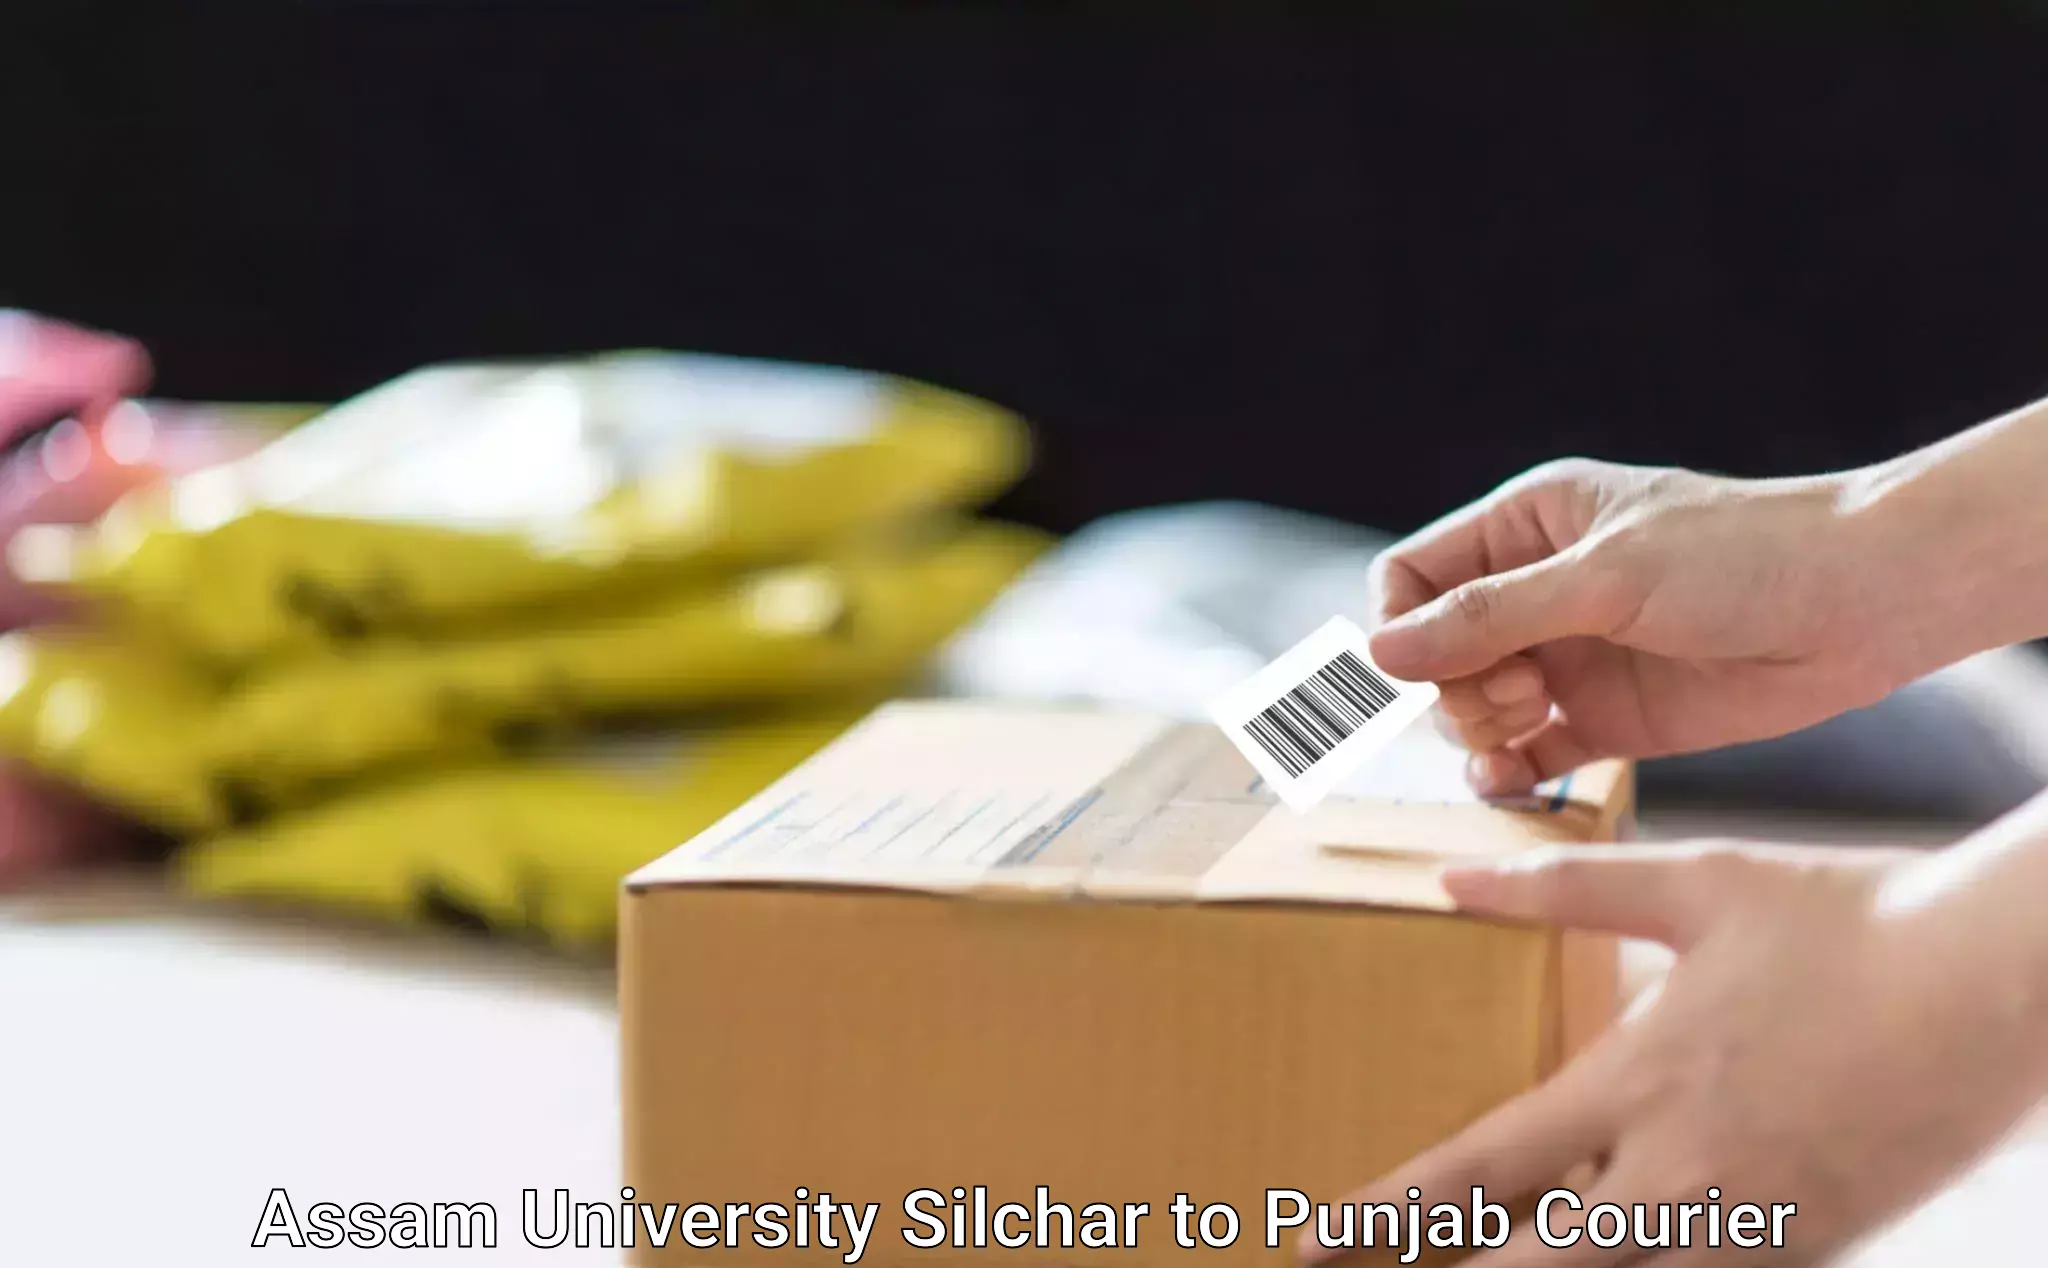 Courier membership Assam University Silchar to Begowal